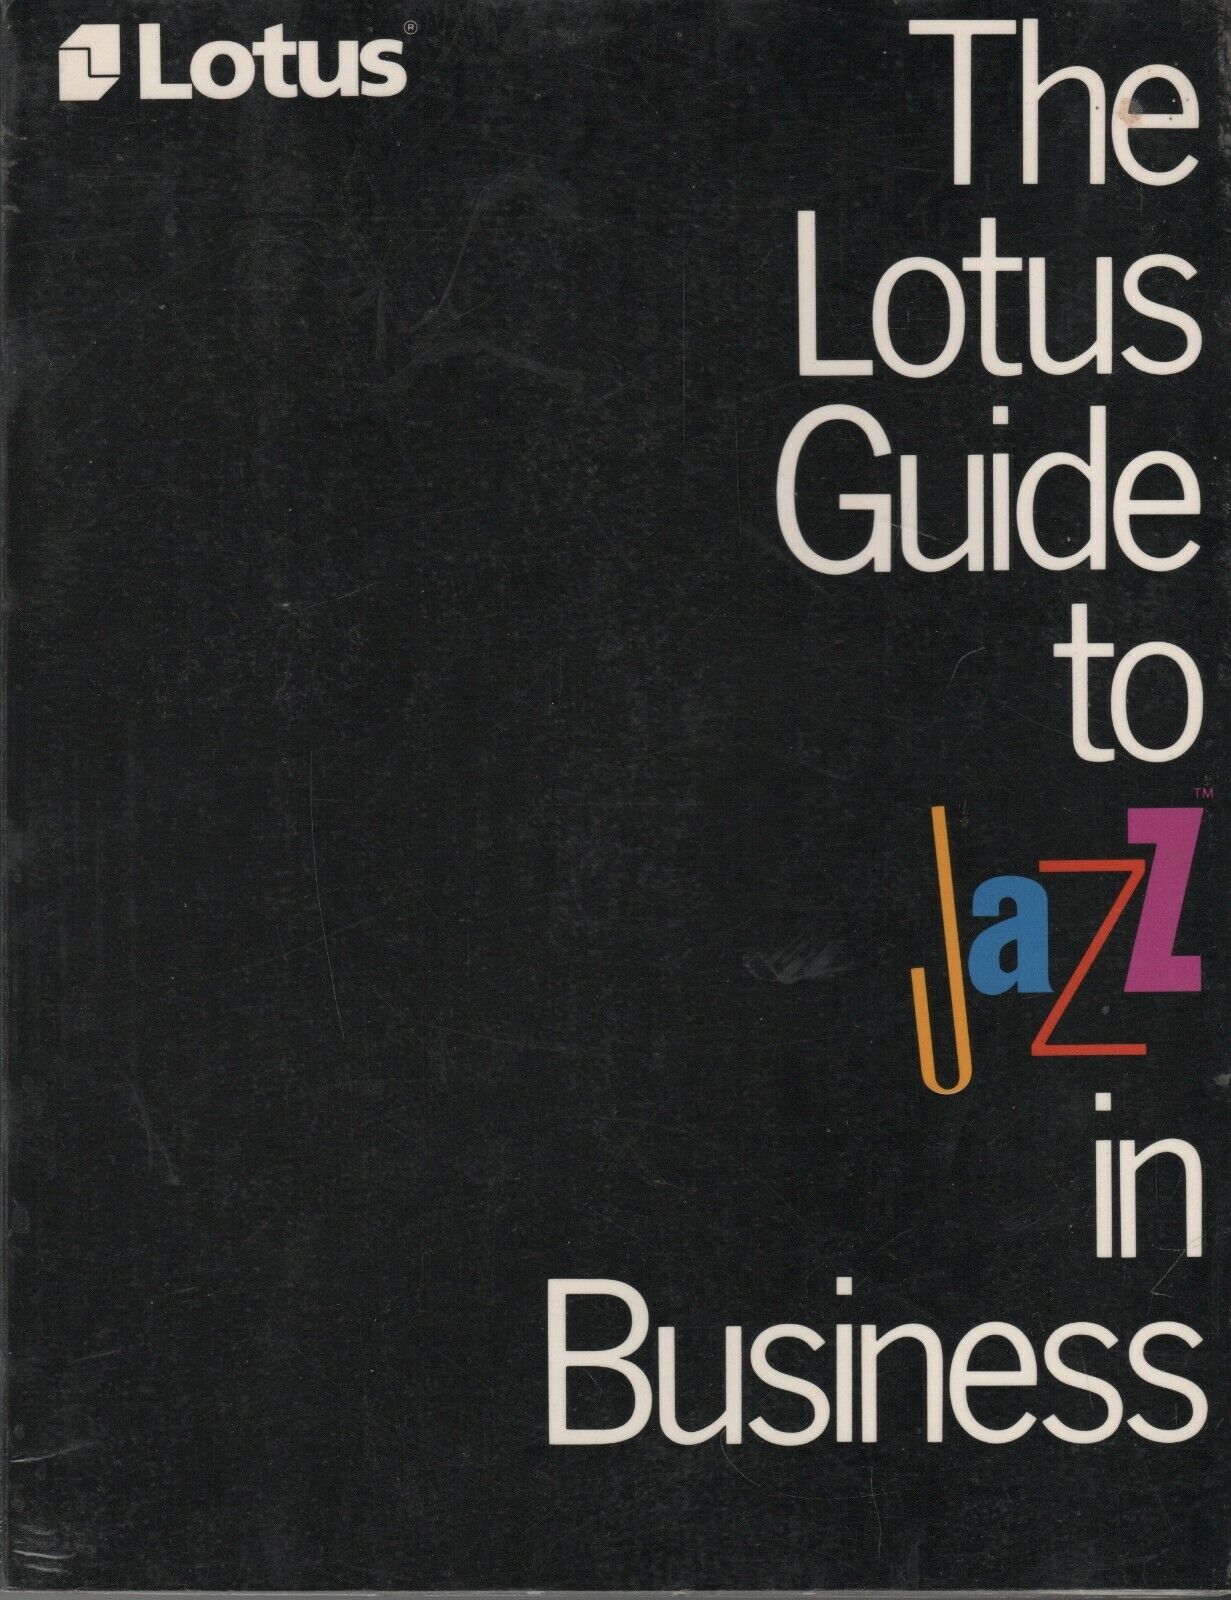 ITHistory (1985) BOOK: LOTUS GUIDE TO JAZZ IN BUSINESS (Addison Wesley) First Q